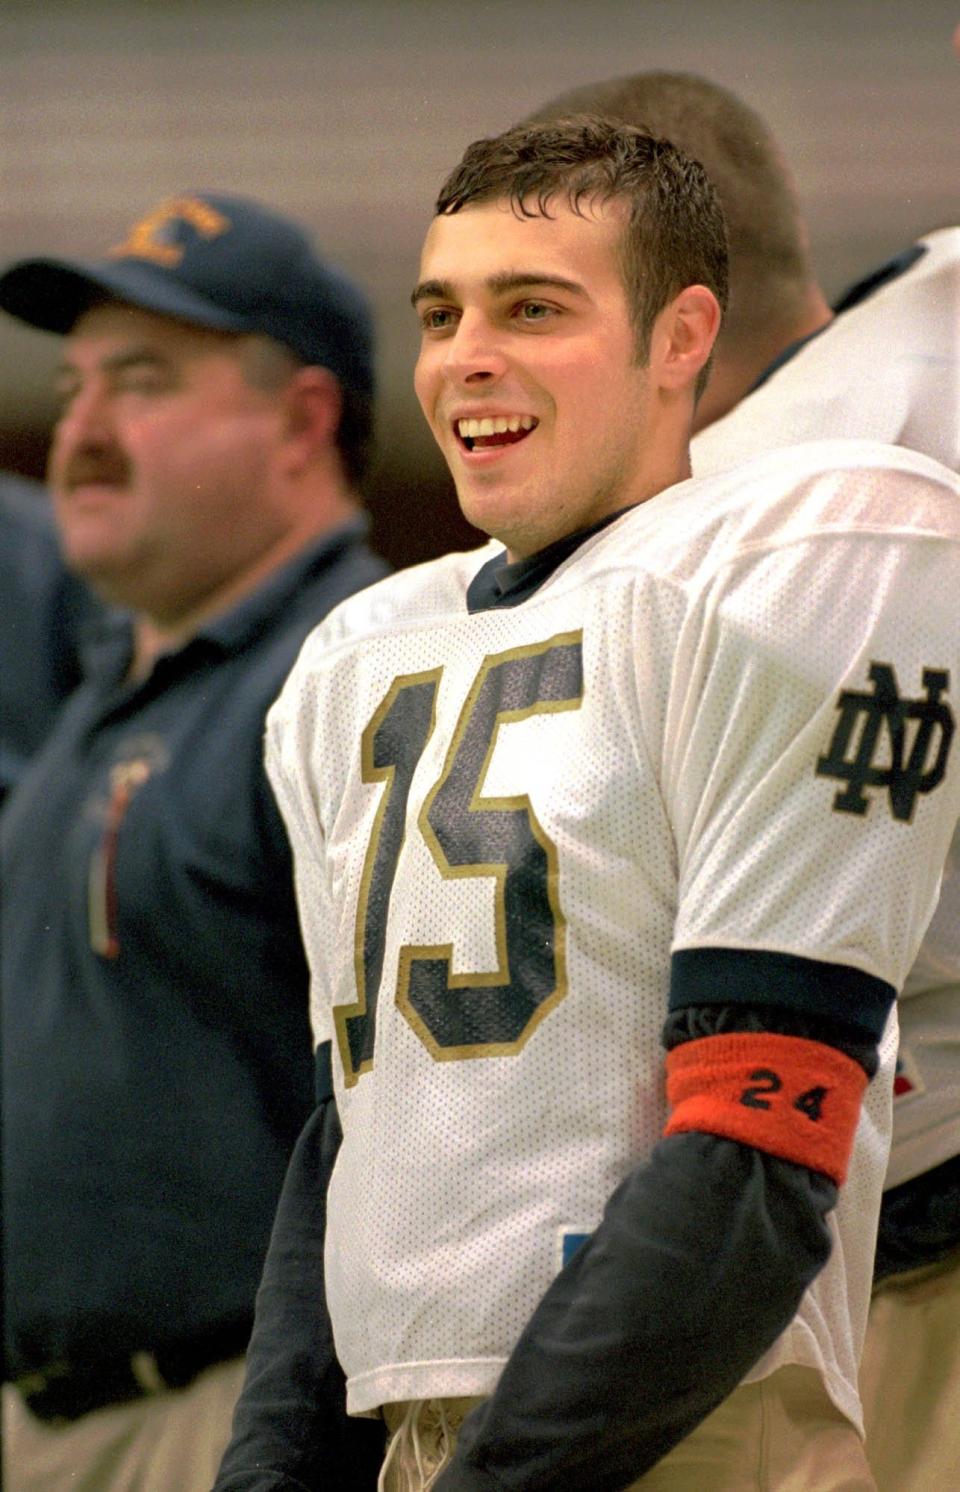 Mike Meck led Elmira Notre Dame to two Section 4 football championships. He is shown with the orange No. 24 armband the Crusaders wore during their run to the 1998 Class C state final following Stephens' death.